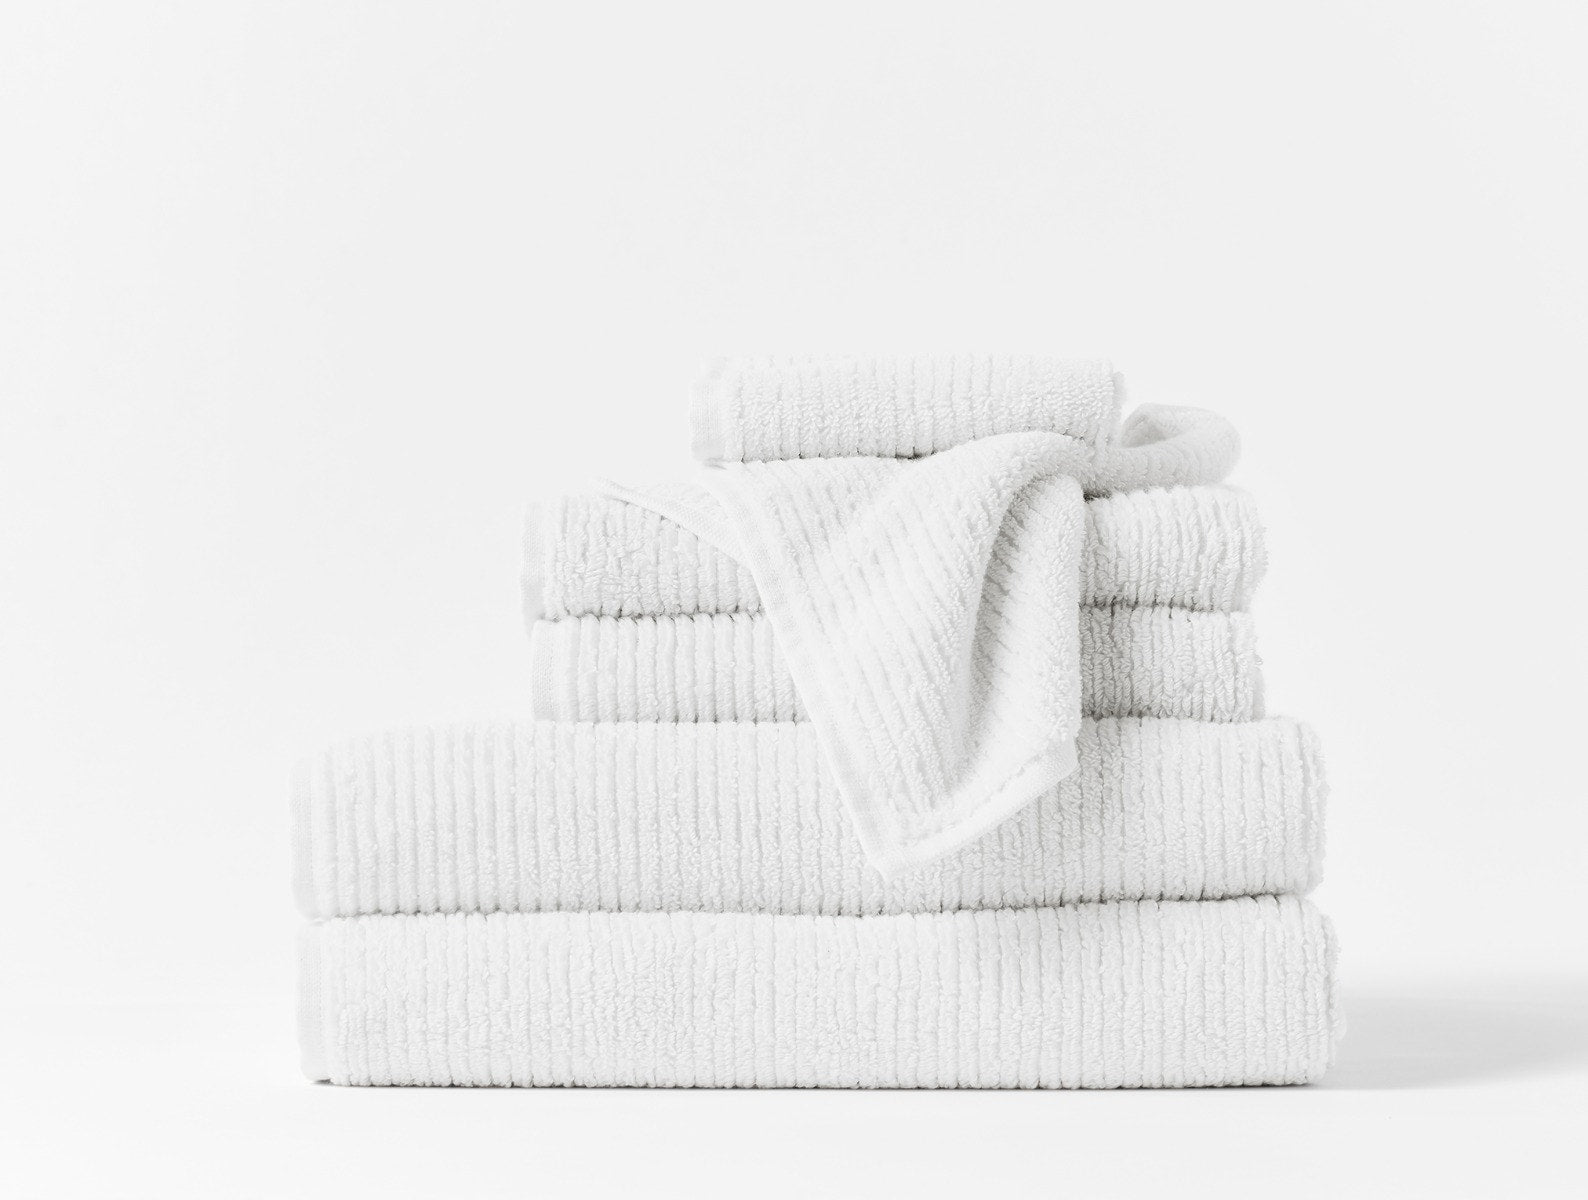 Quick-Dry White Organic Cotton Hand Towel + Reviews